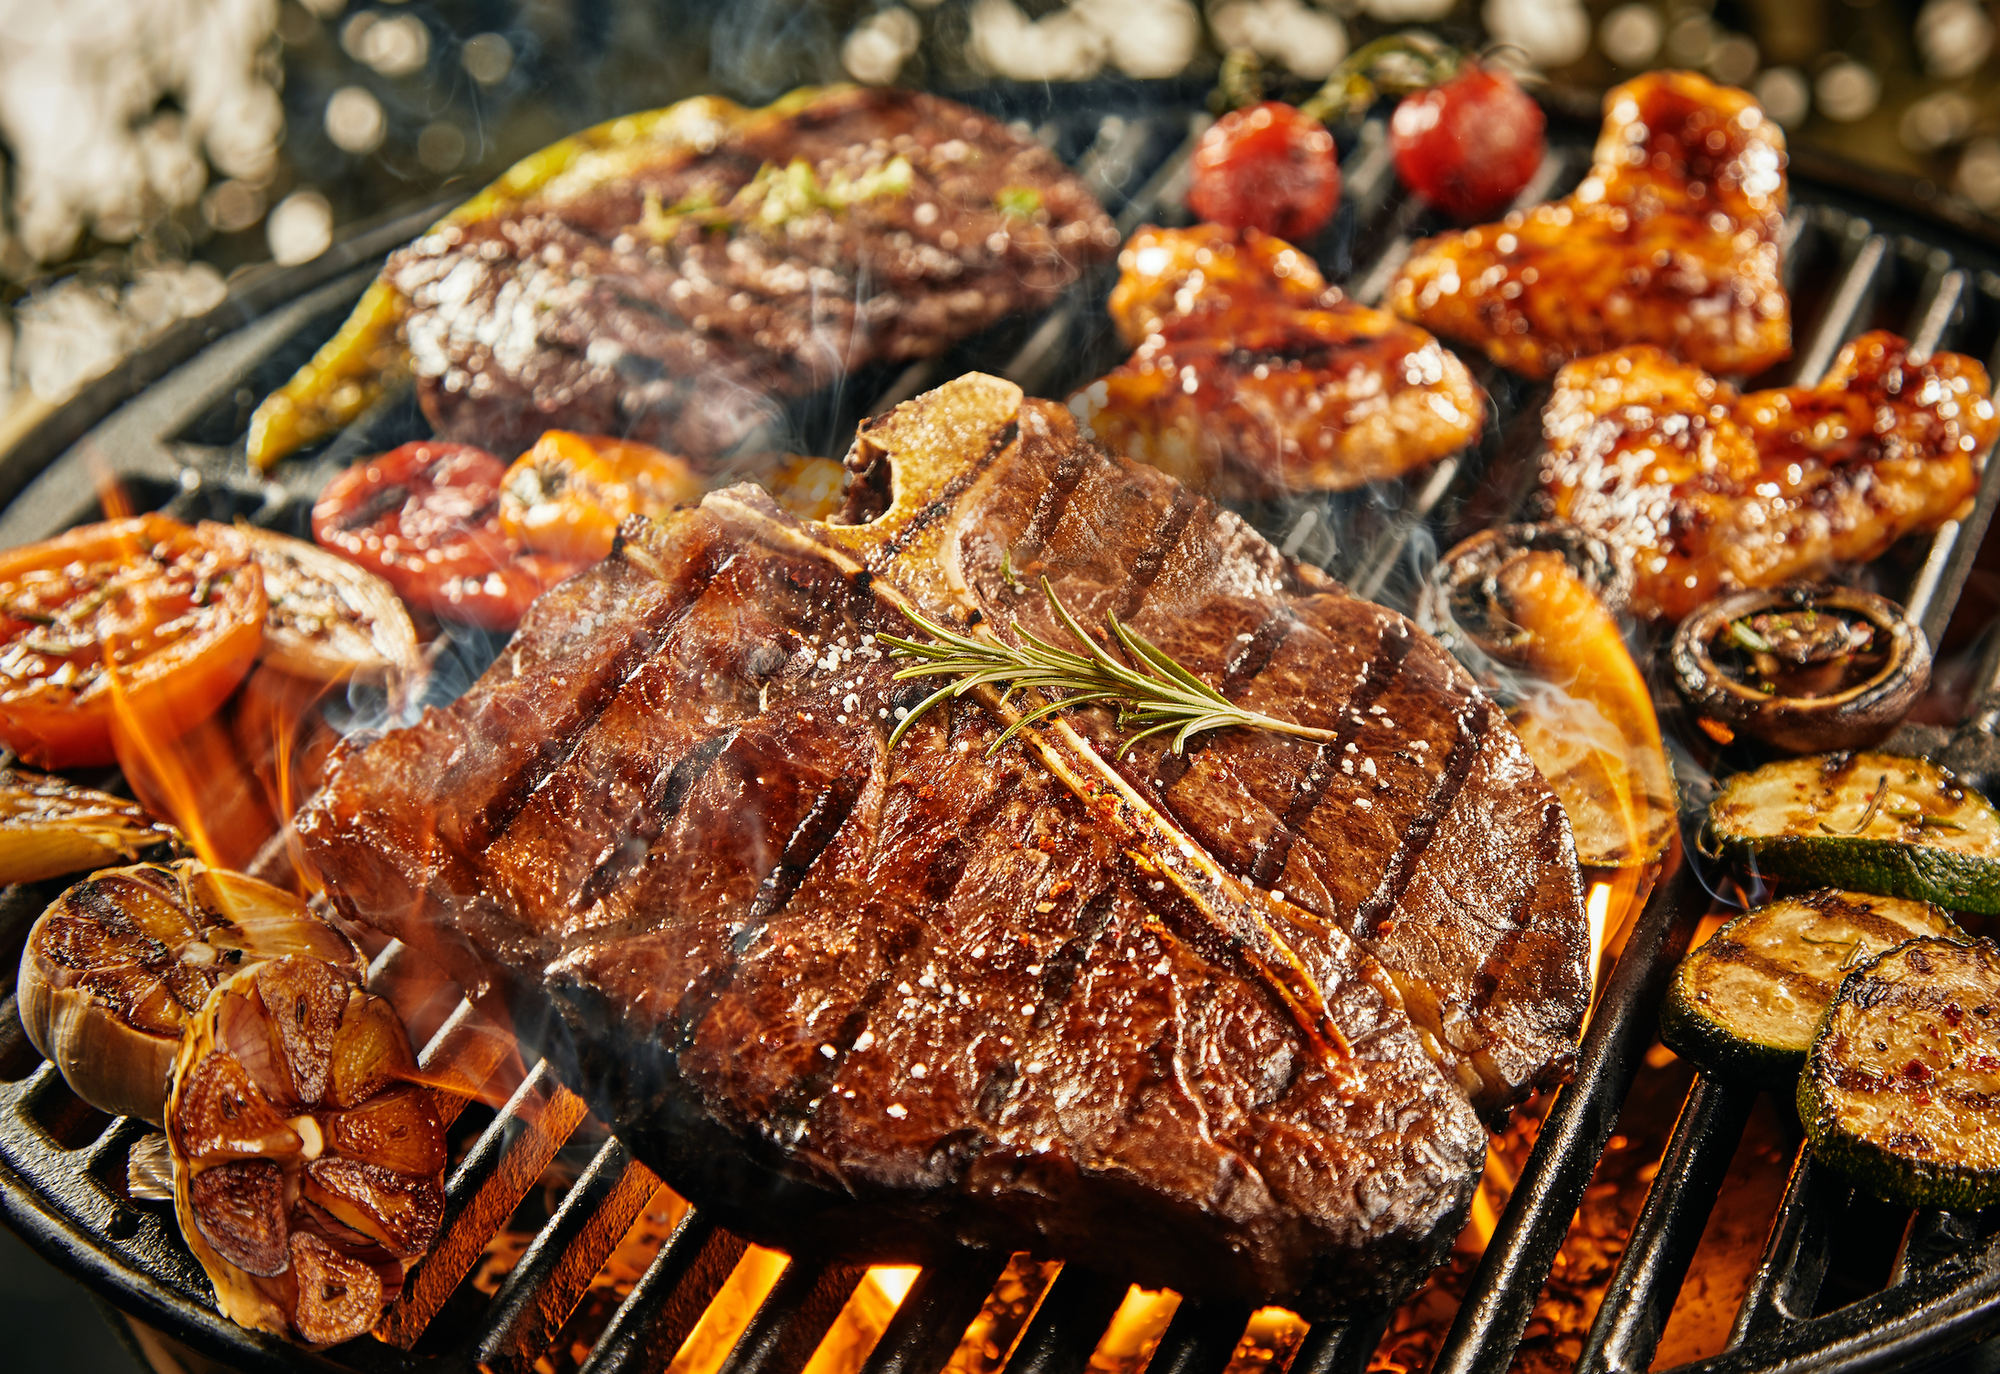 Choosing Your Protein: Why You Don't Need a Steak That Big